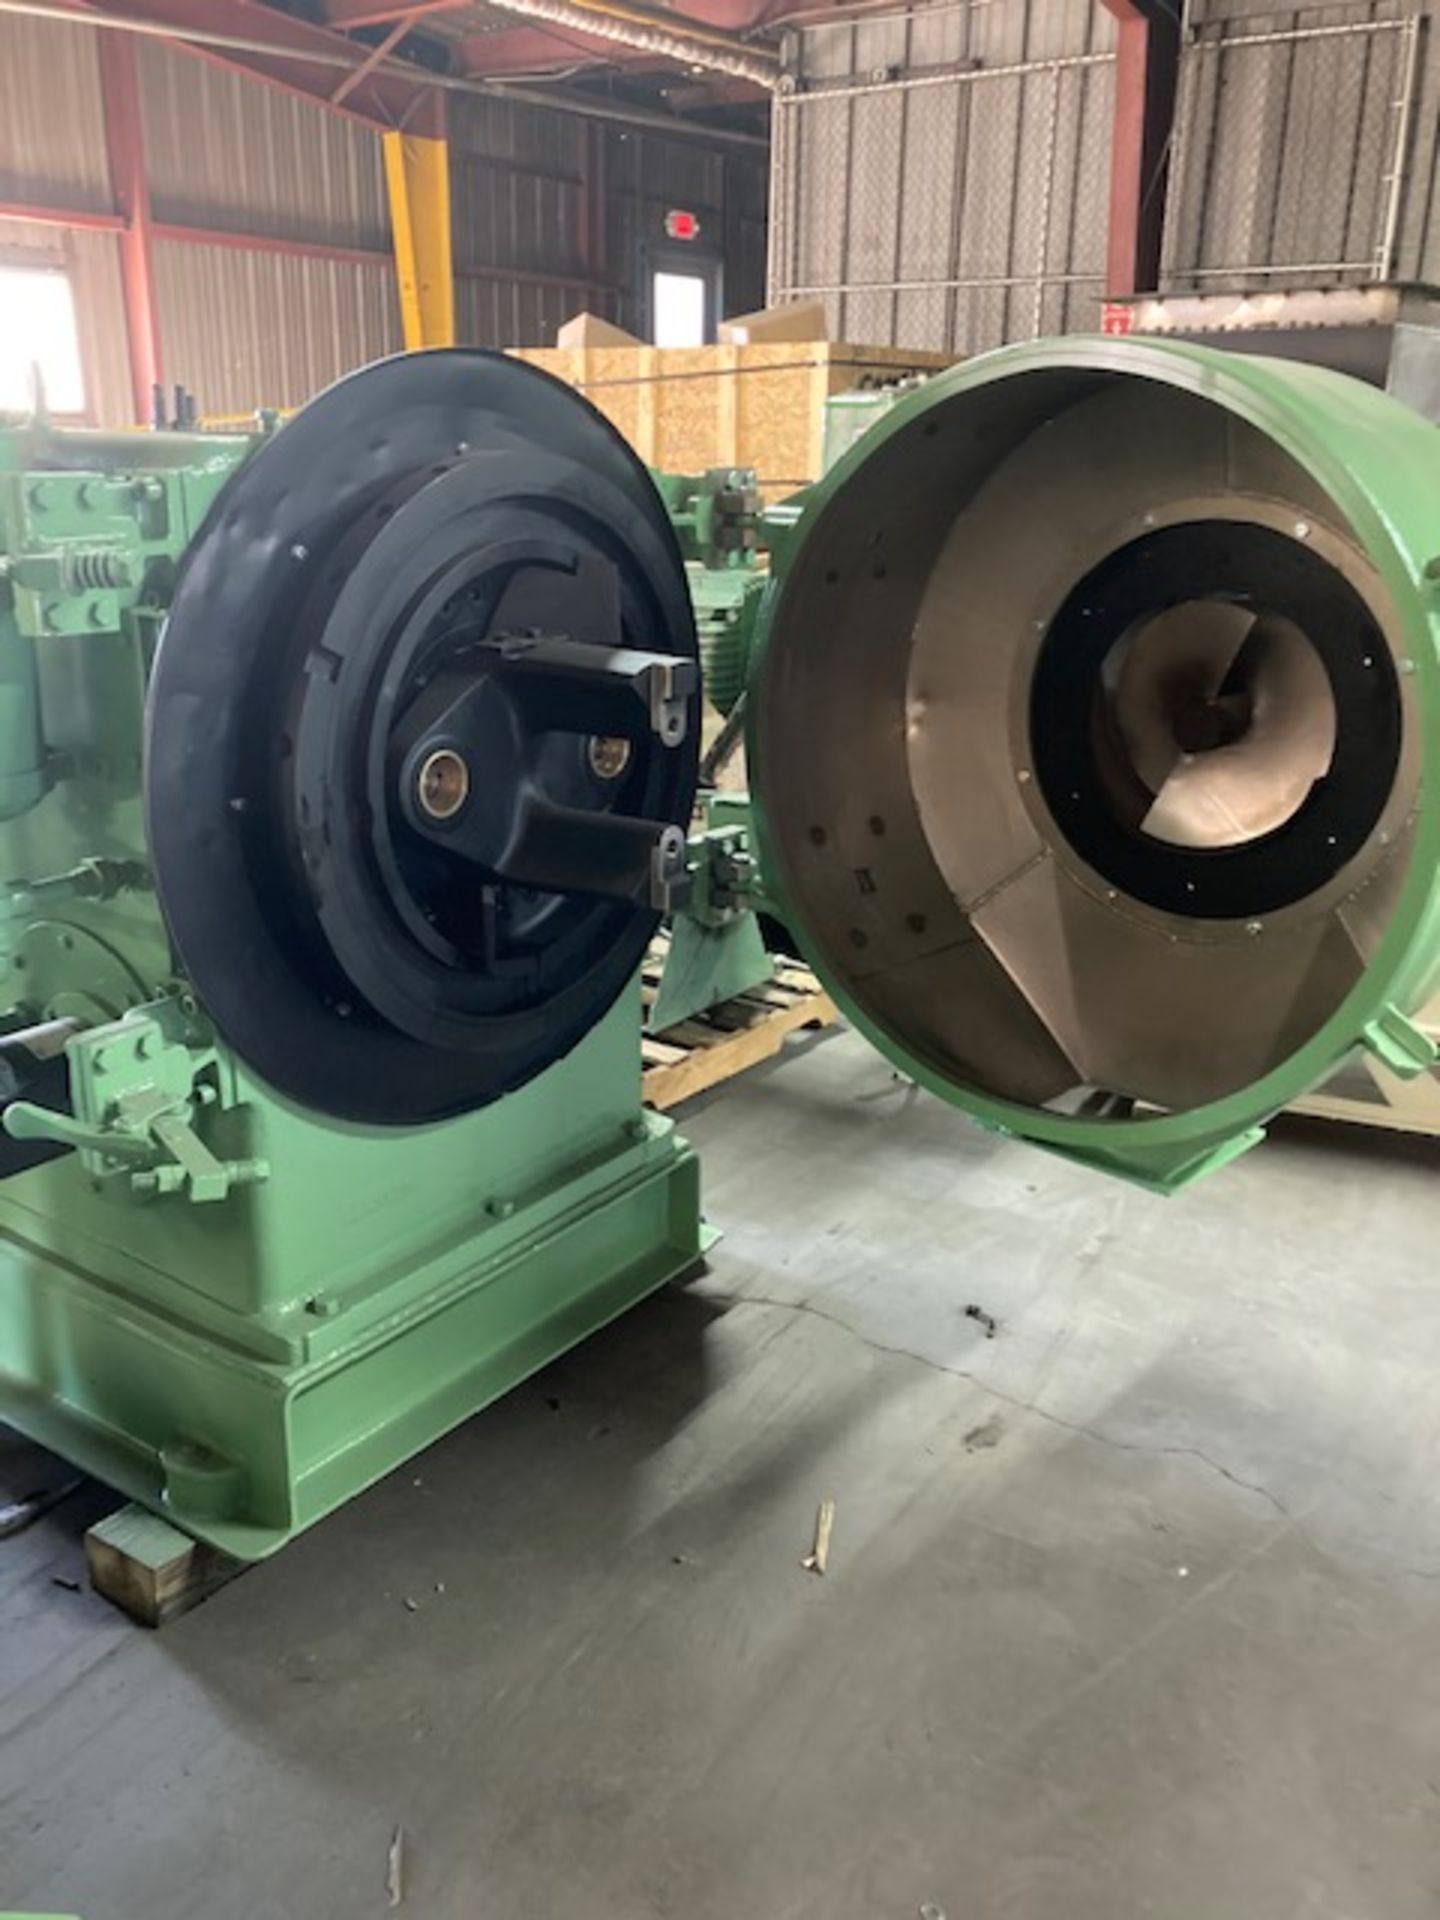 Located in Canon City CO: Rebuilt CPM 7000 pellet mill with new bearings, good gears, mainshaft,